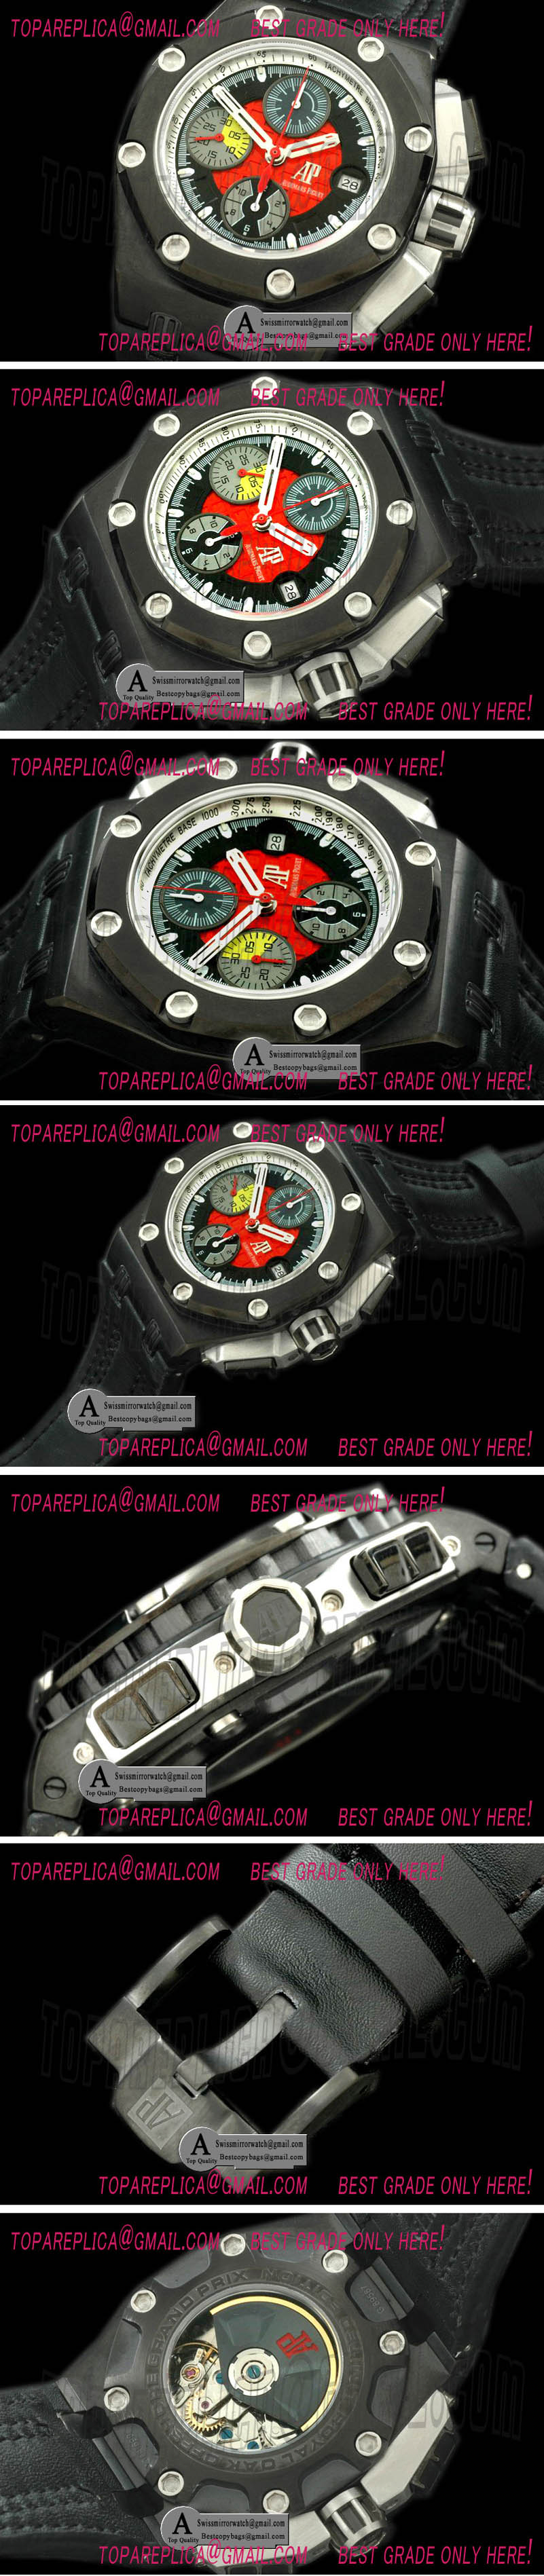 Audemars Piguet 26290IO.OO.A001VE.01 Grand Prix Limited Edition PVD/Rubber Red A-7750